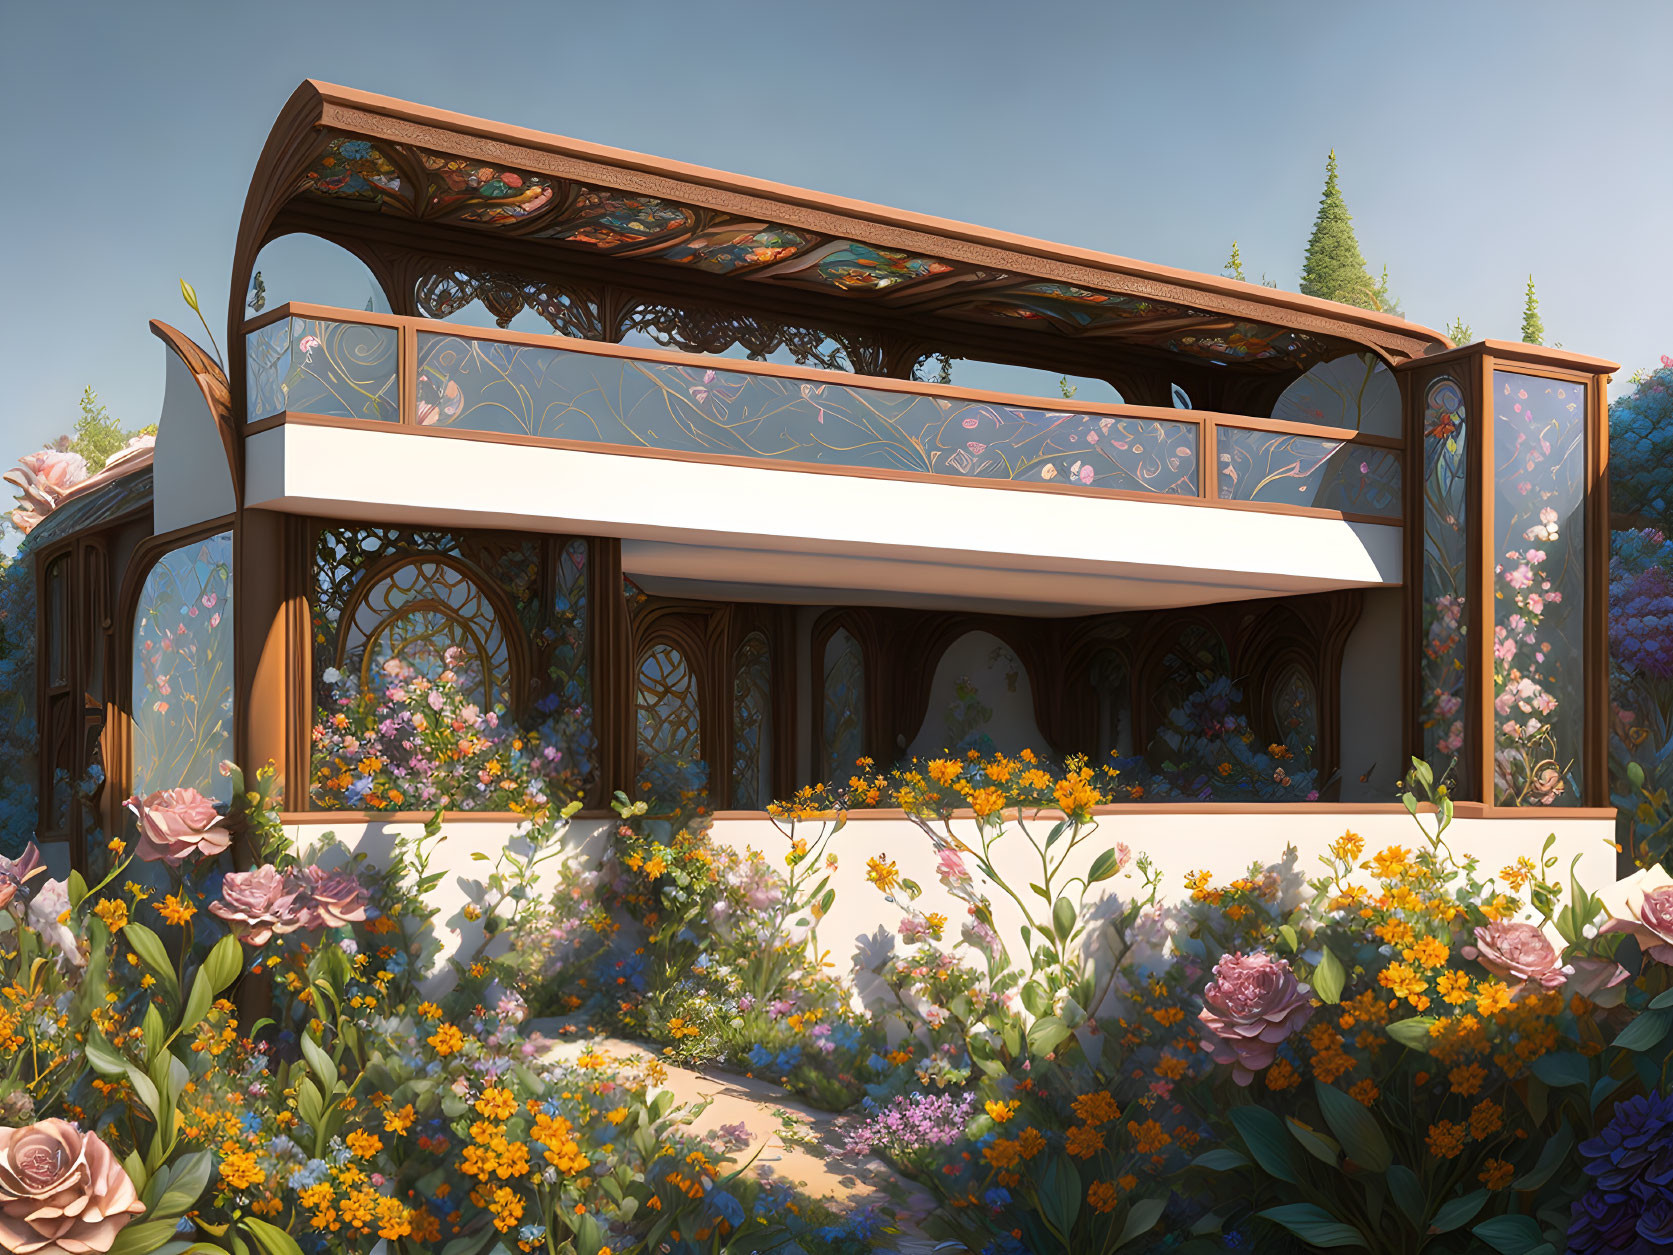 Intricate Wooden Gazebo Surrounded by Colorful Flower Beds